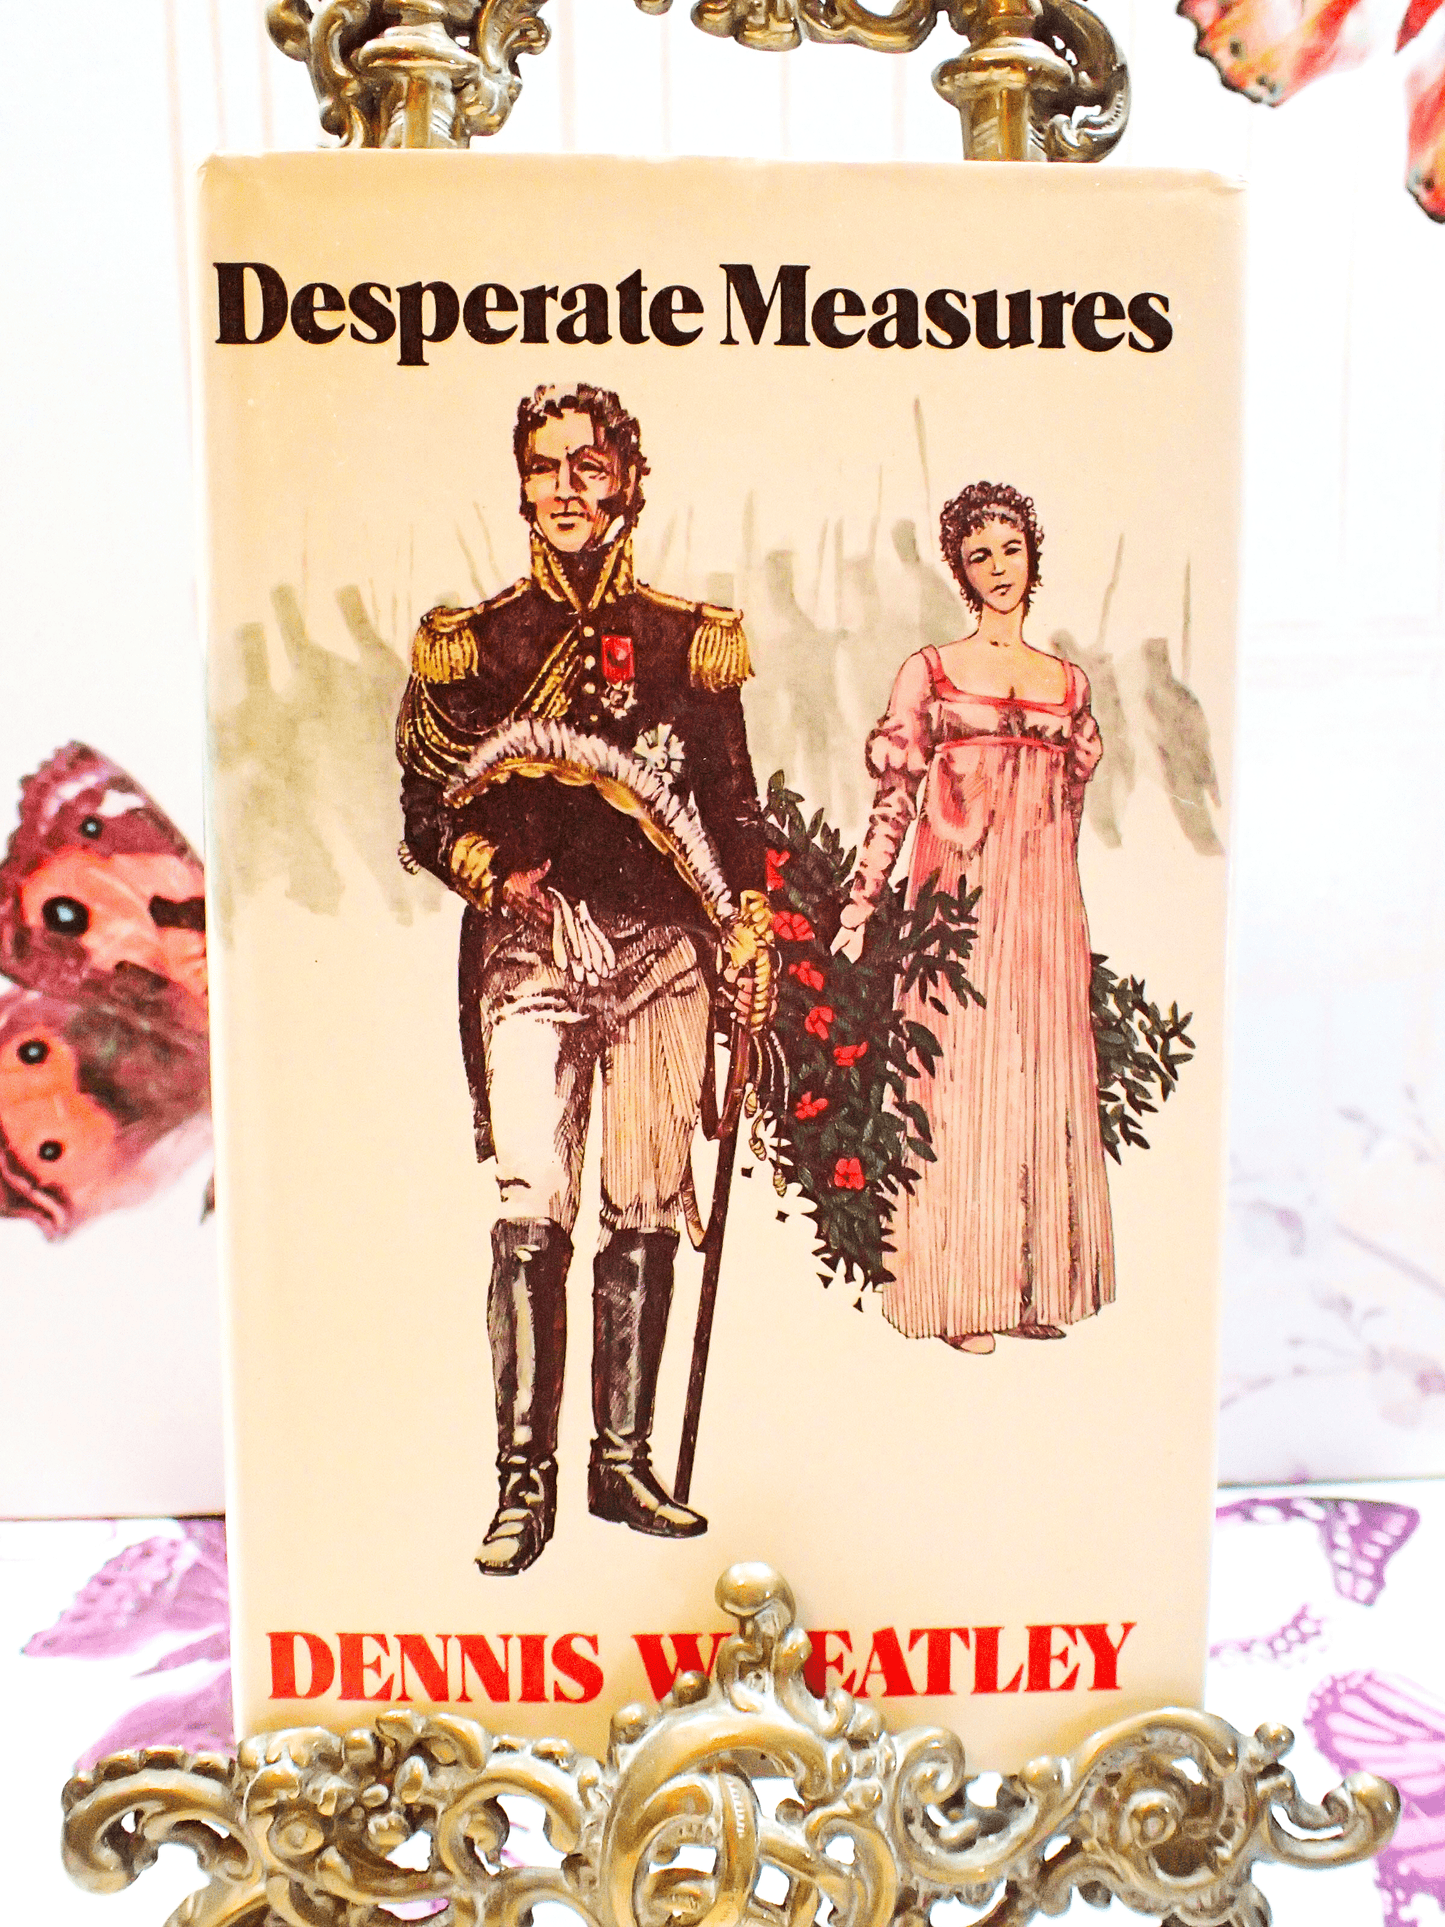 Desperate Measures by Dennis Wheatley Roger Vintage Book Roger Brook 1975 First Edition Thus BCA